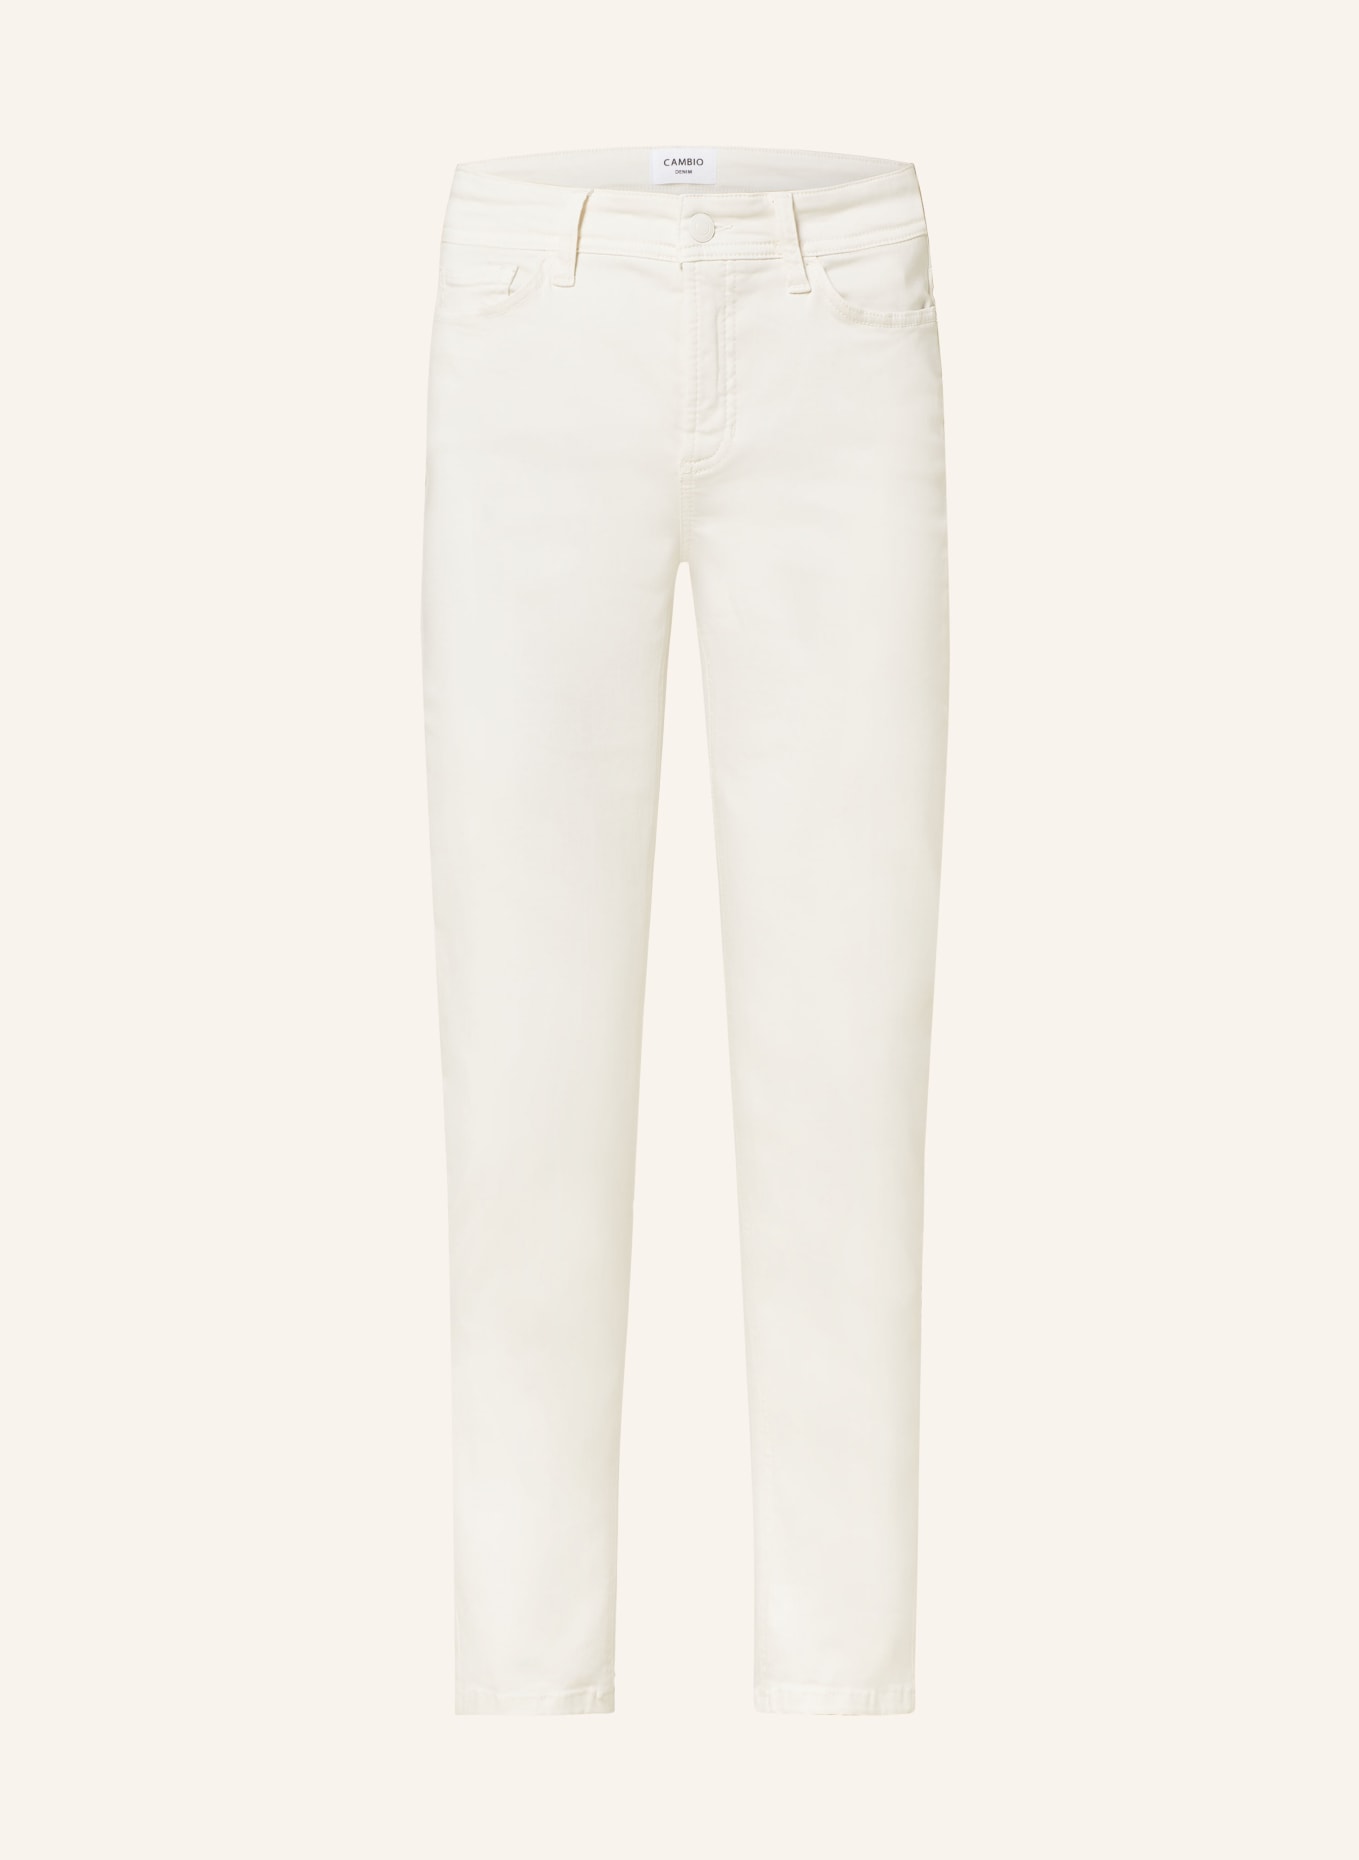 CAMBIO Skinny jeans PIPER, Color: 706 sand (Image 1)